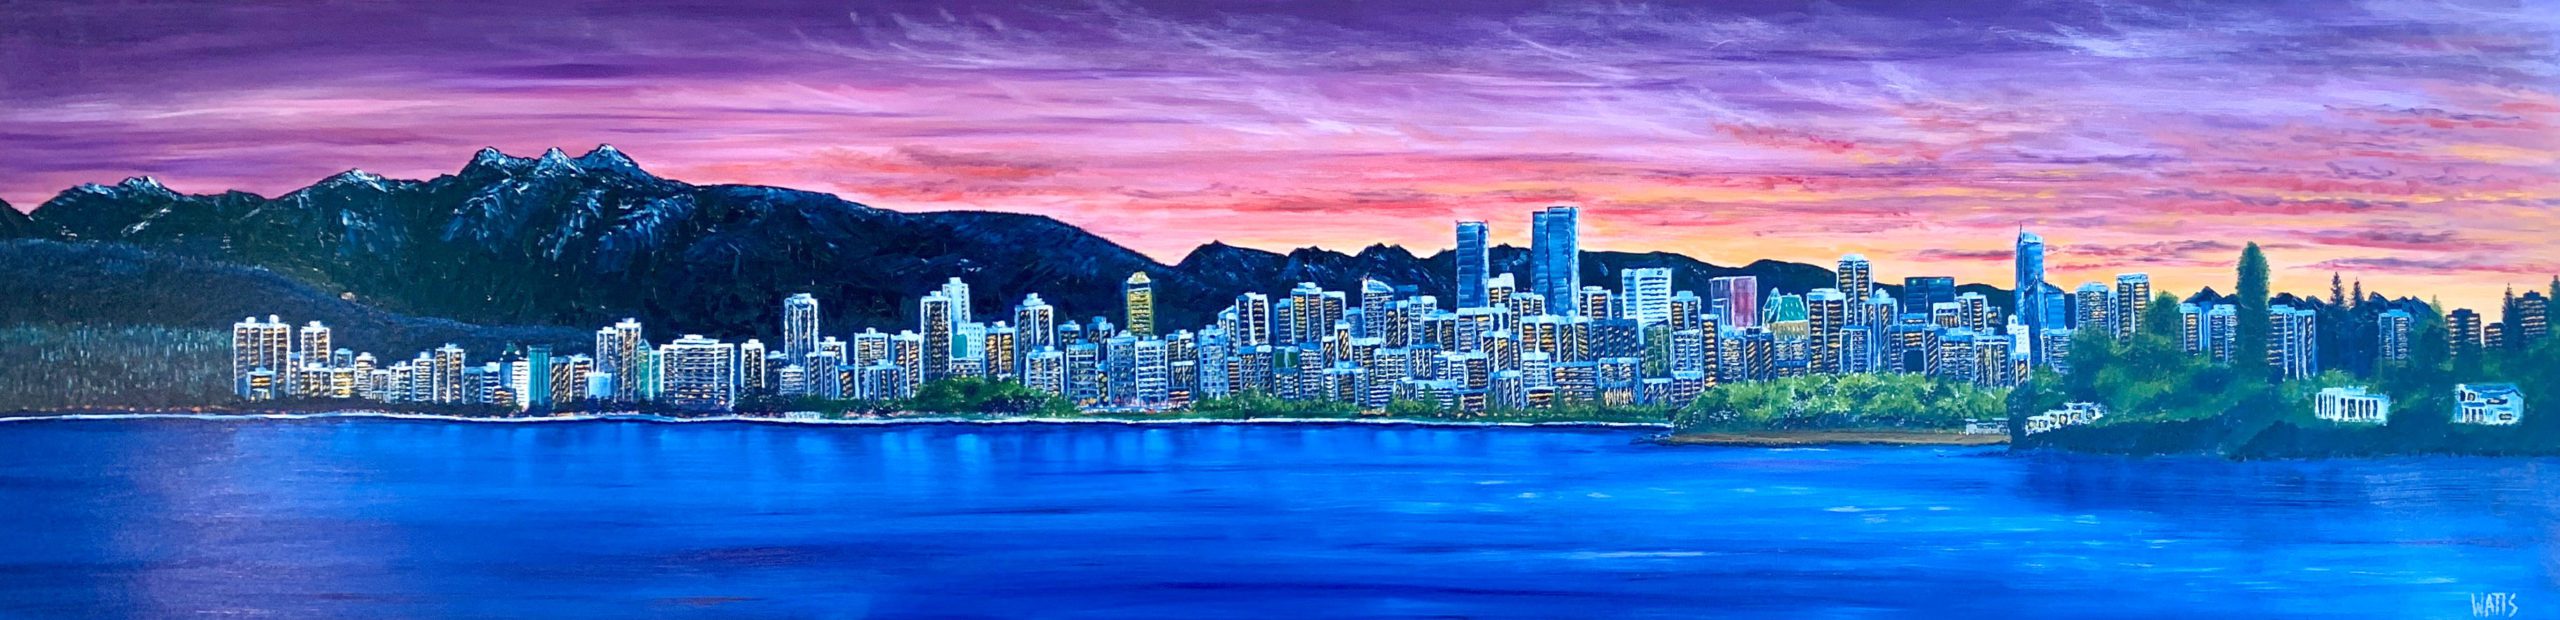 Vancouver Canada Skyline, original painting of Vancouver, BC bry graham watts